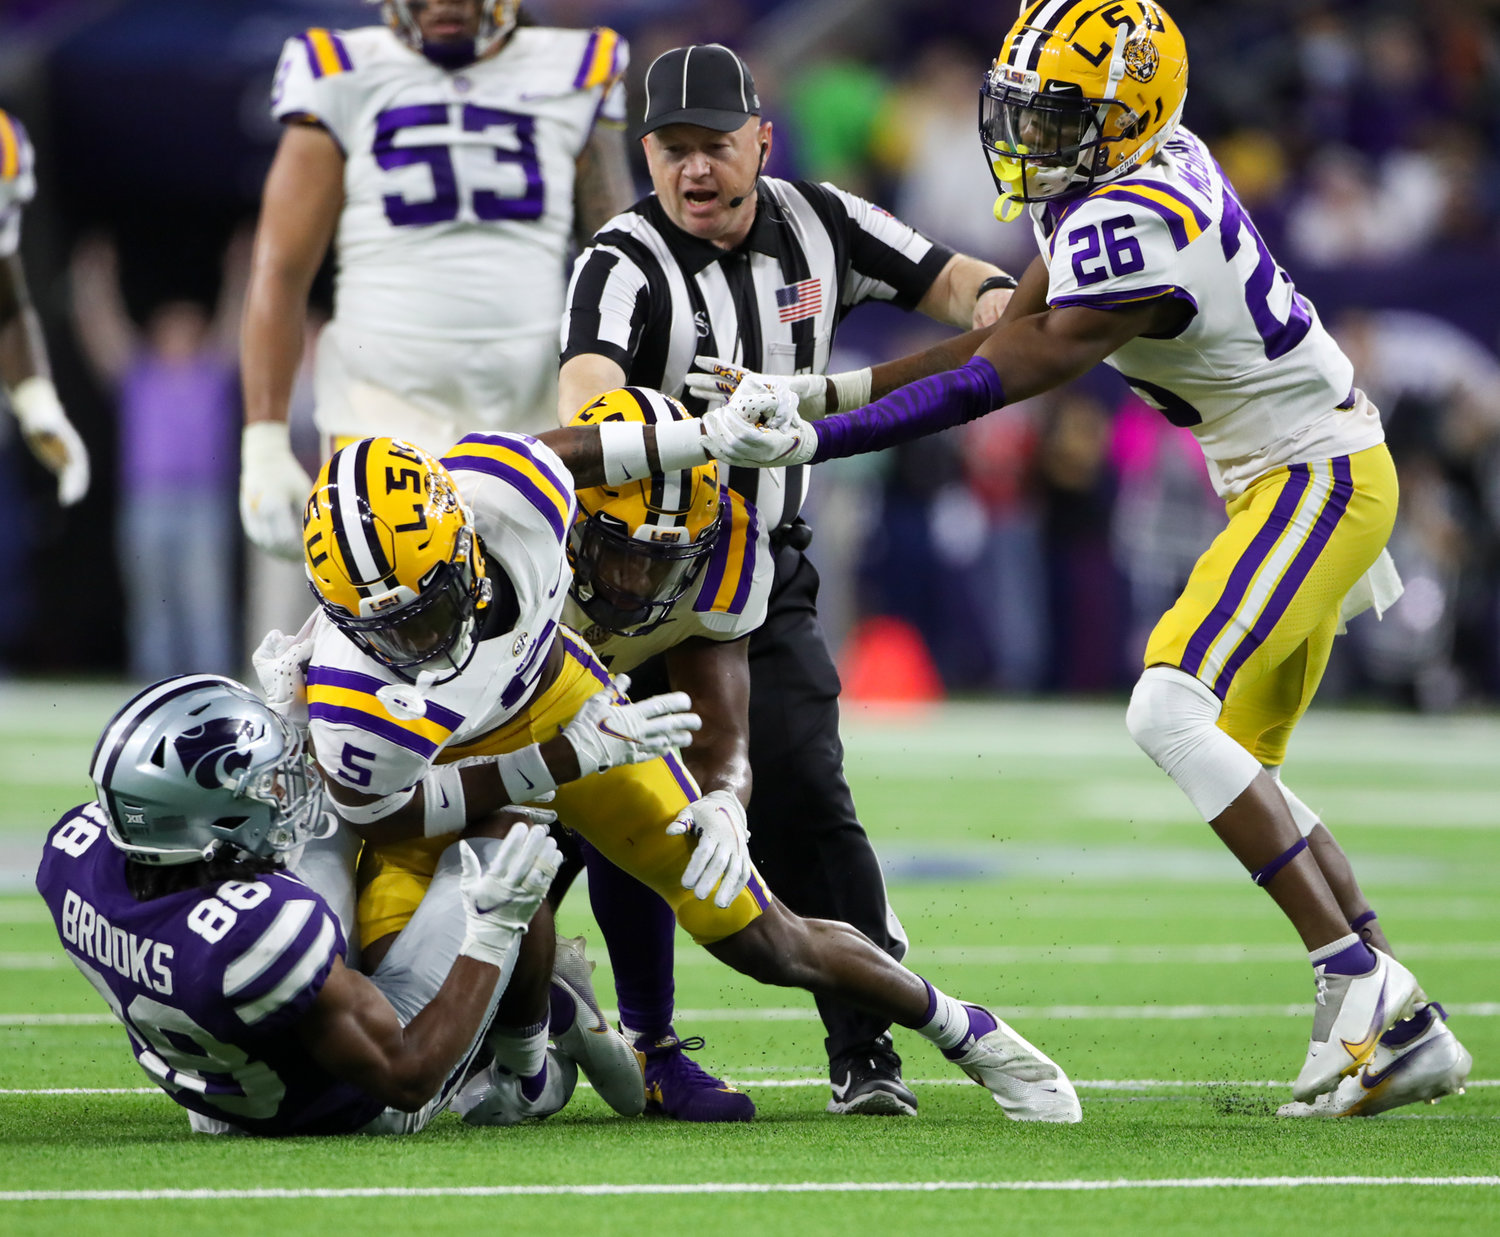 LSU Tigers defensive back Damarius McGhee (26) and umpire Tim Gover work to break up a scuffle between Tigers safety Jay Ward (5) and Kansas State Wildcats wide receiver Phillip Brooks (88) during the first half of the TaxAct Texas Bowl on Jan. 4, 2022 in Houston, Texas.